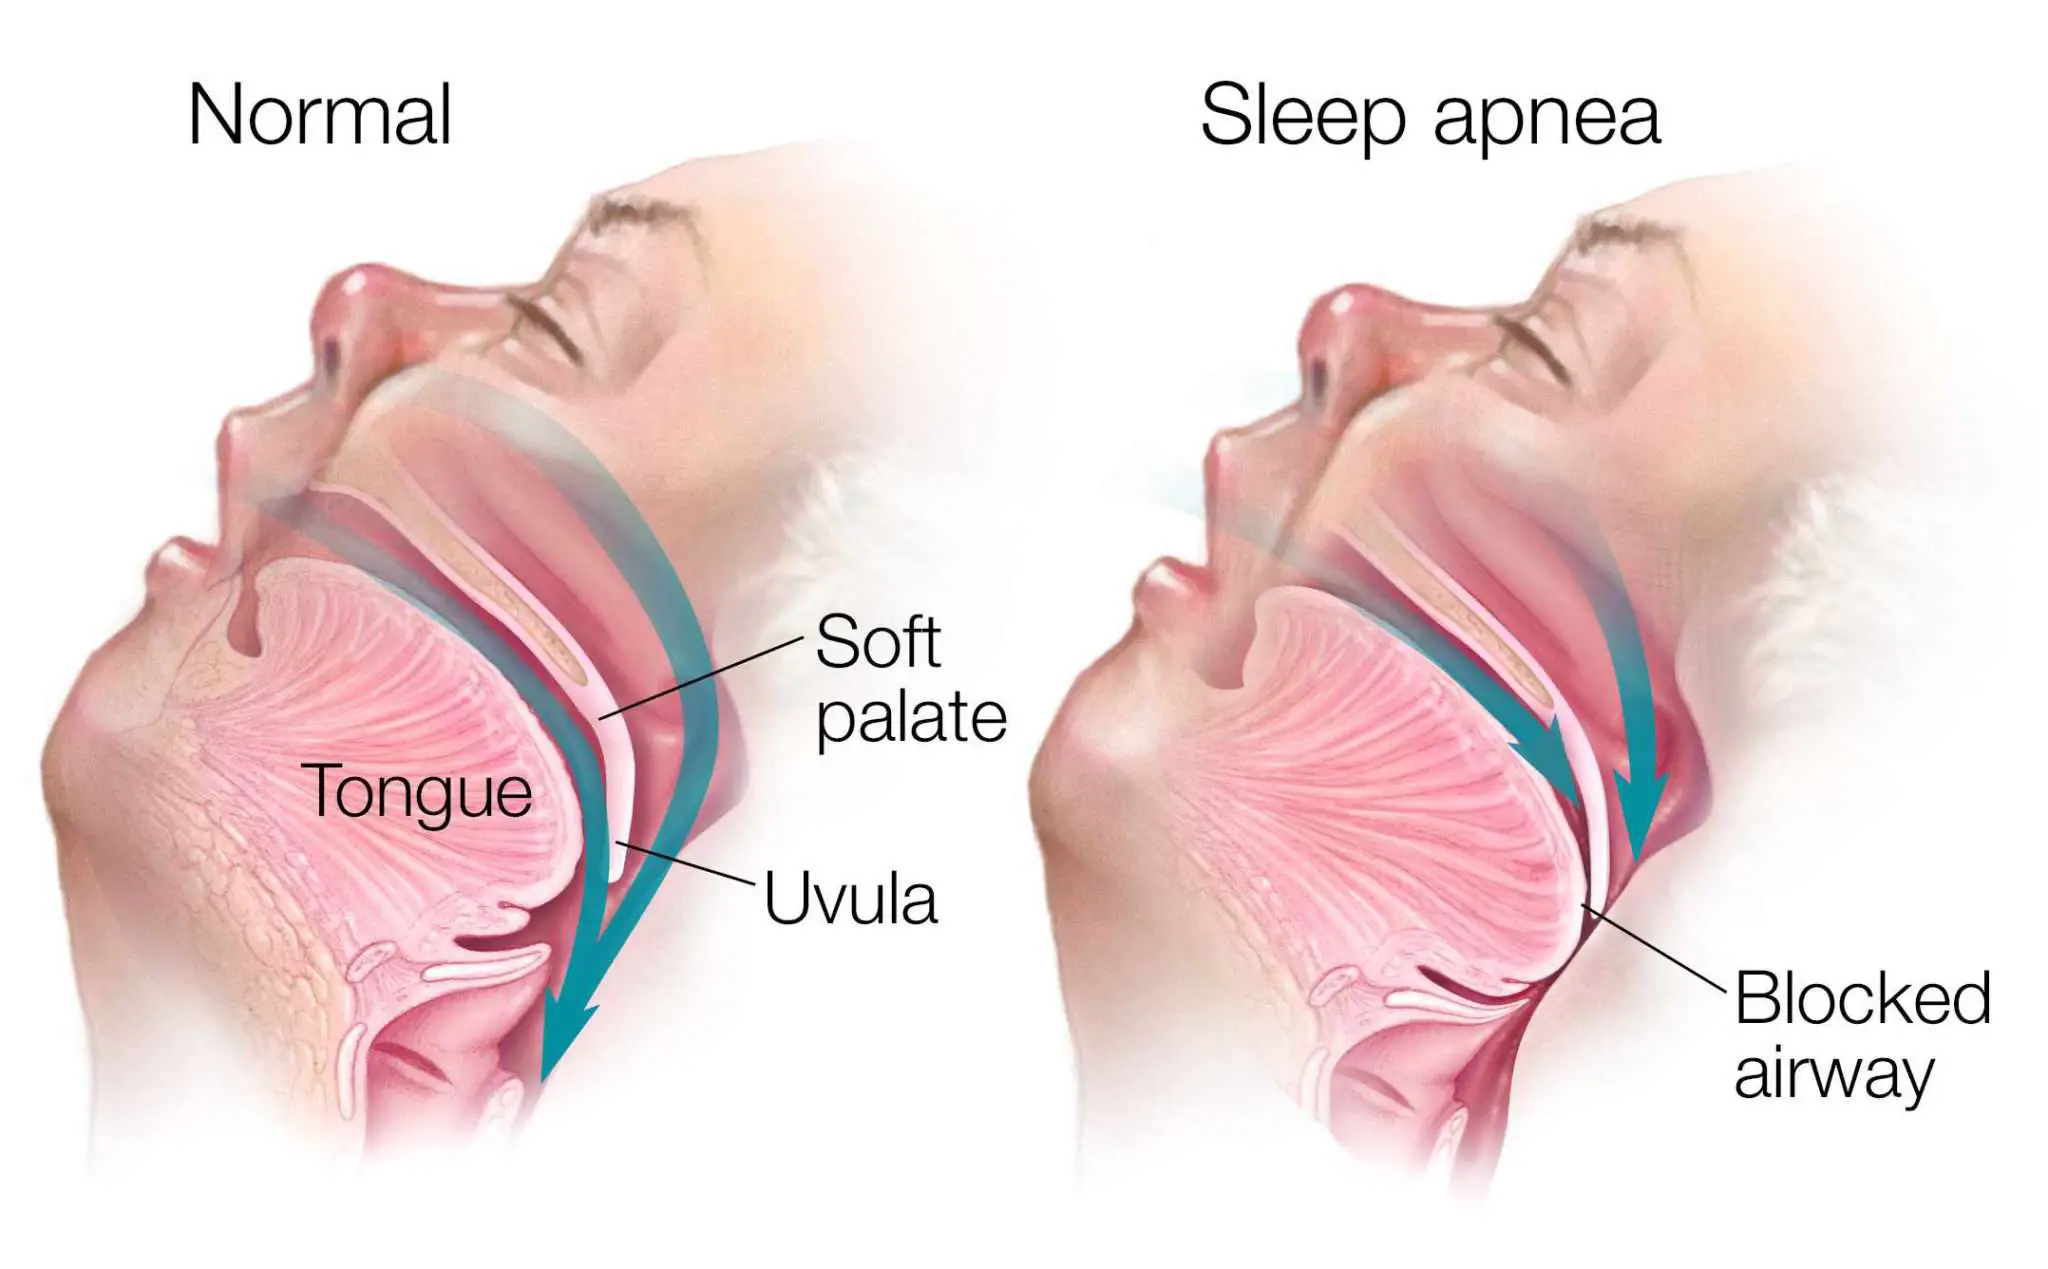 WHAT ARE THE SIGNS AND SYMPTOMS OF SLEEP APNEA?